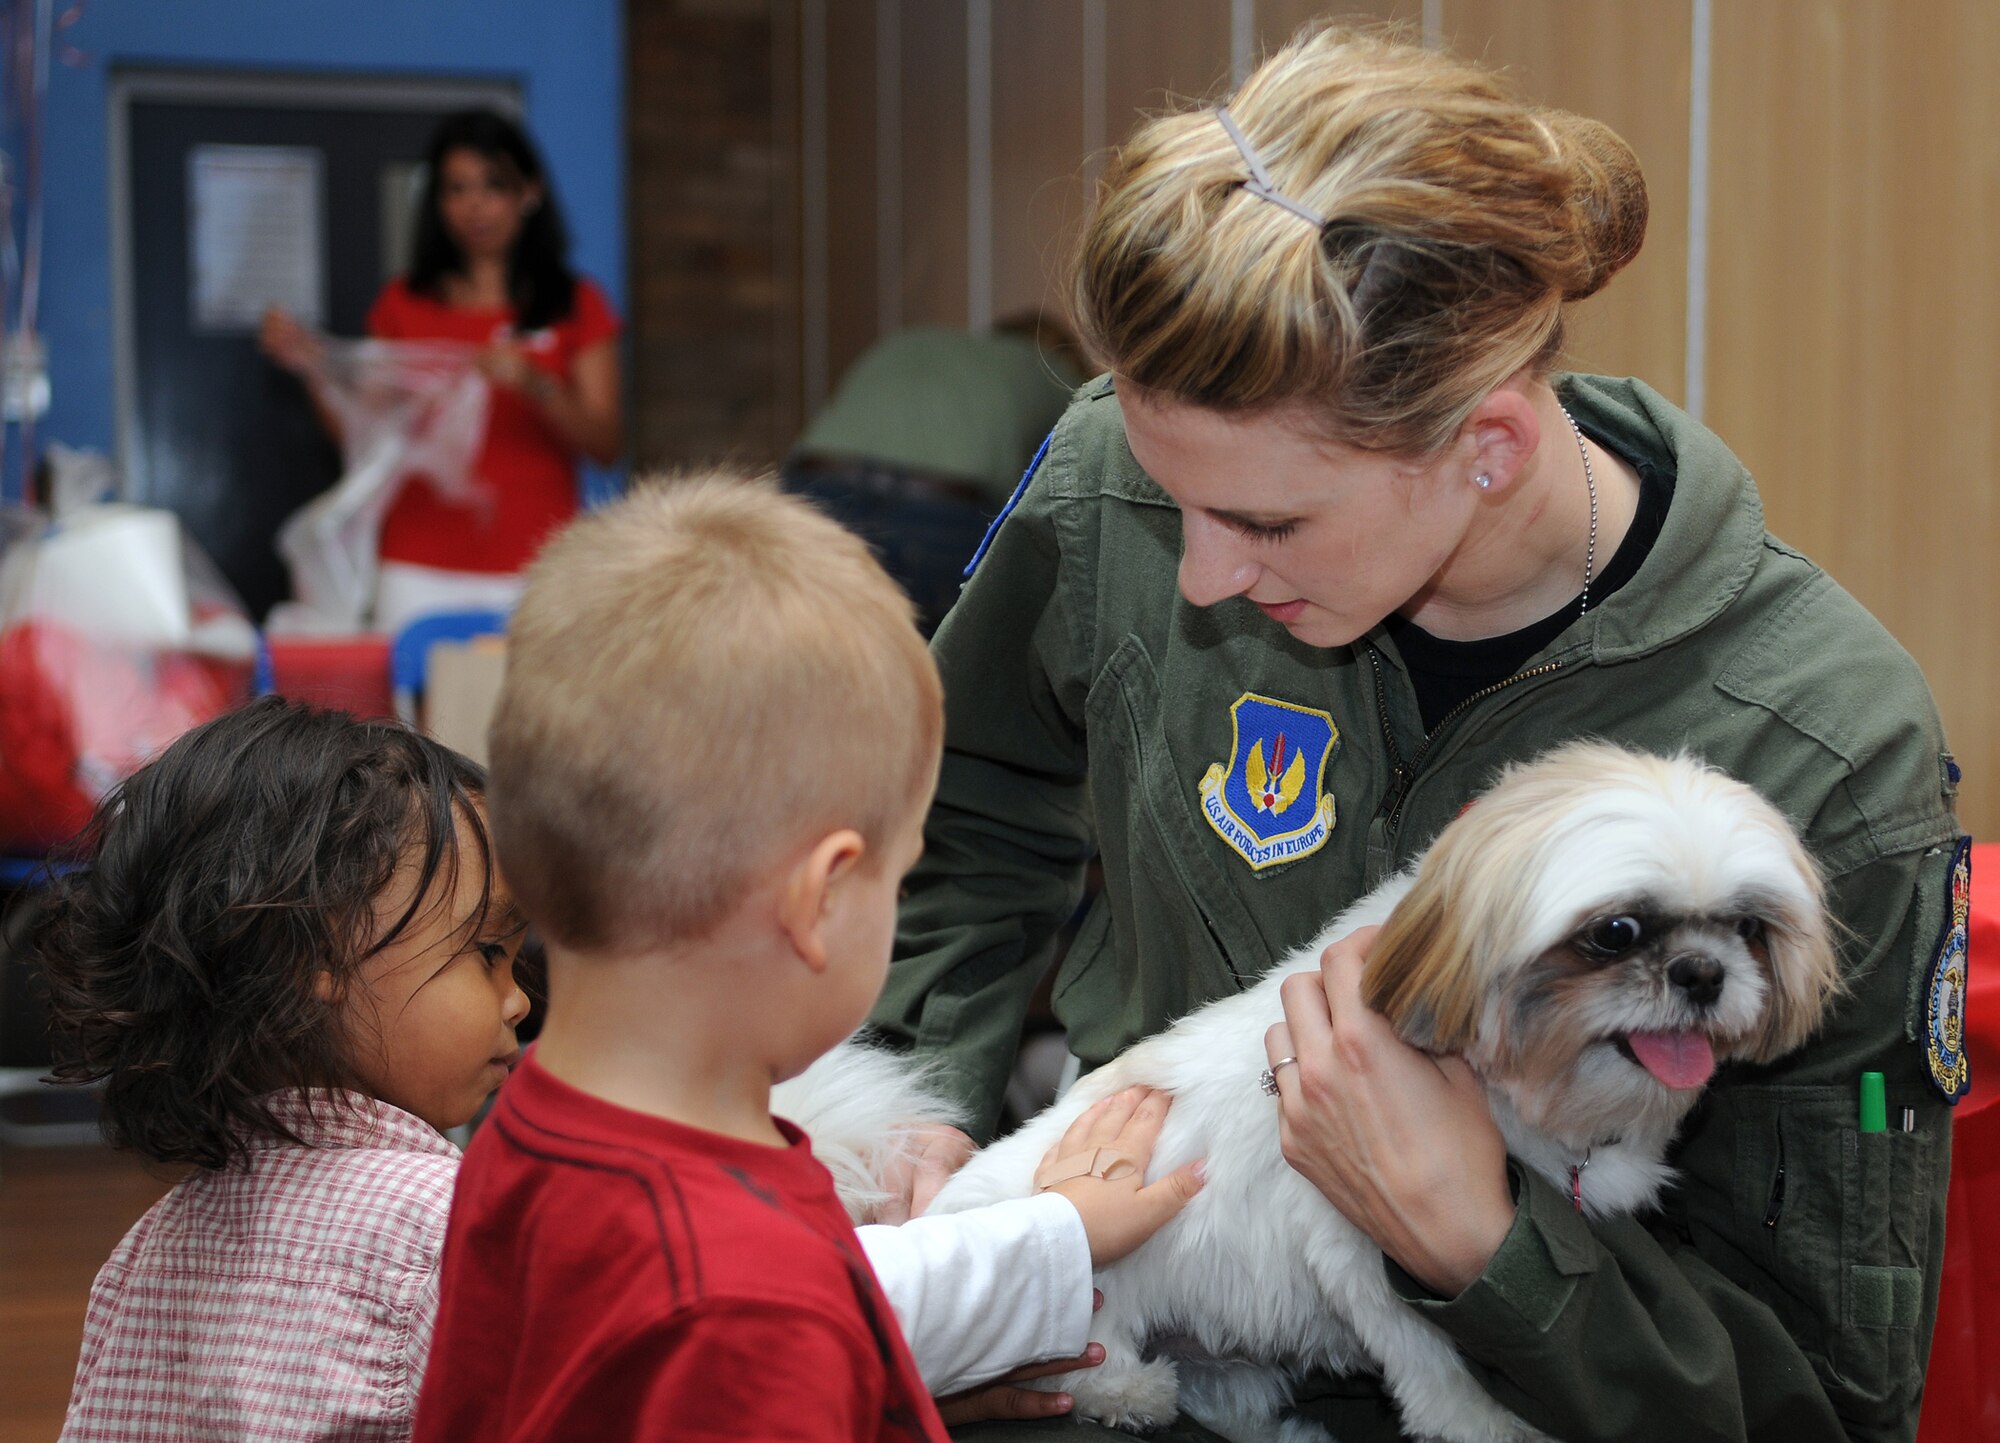 RAF MILDENHALL, England -- Children learn proper pet safety practices from 1st Lt. Natalie Winkels, 351st Air Refueling Squadron, at a Kids' Safety Day hosted by the American Red Cross Aug. 27 at the Bob Hope Community Center. Lieutenant Winkels volunteered to run a pet safety booth to show children how to safely approach an animal they do not know. "Kids don't always realize that just because a dog is small, that it can be dangerous, too," she said. (U.S. Air Force photo/Senior Airman Thomas Trower)